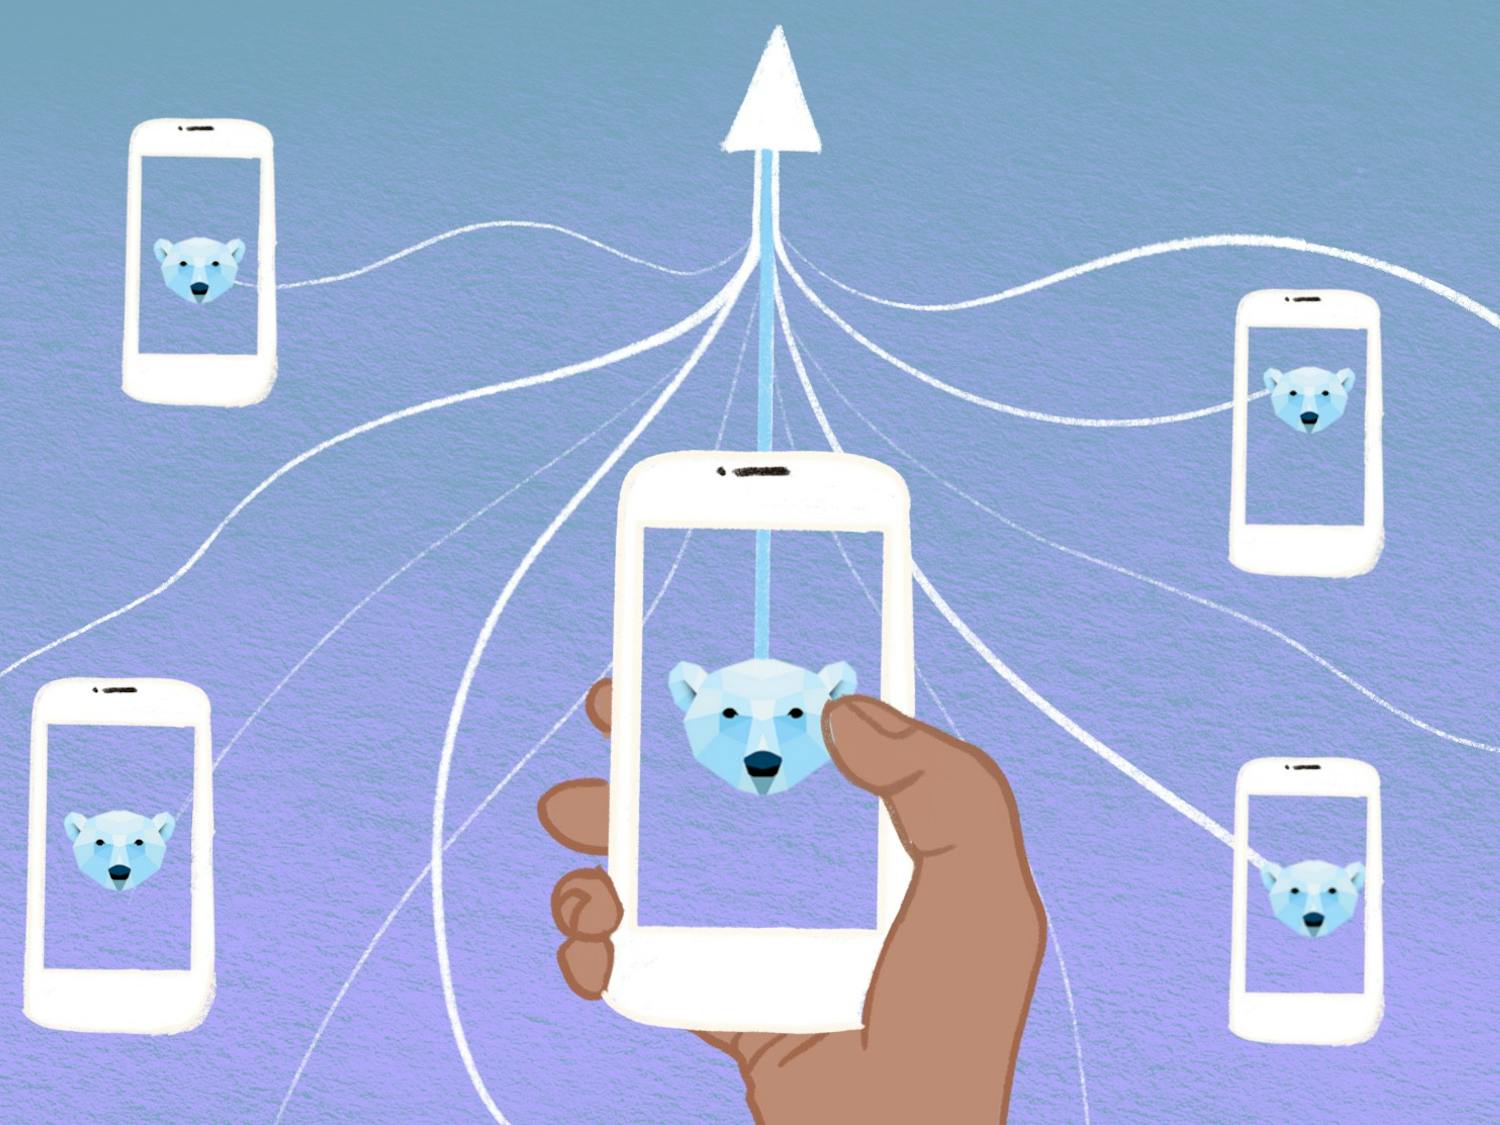 The polar baer app is “the only app where you meet 100% of your matches,” according to co-founder Charles Heitmuller. [graphic by Aubrey Bocalan]